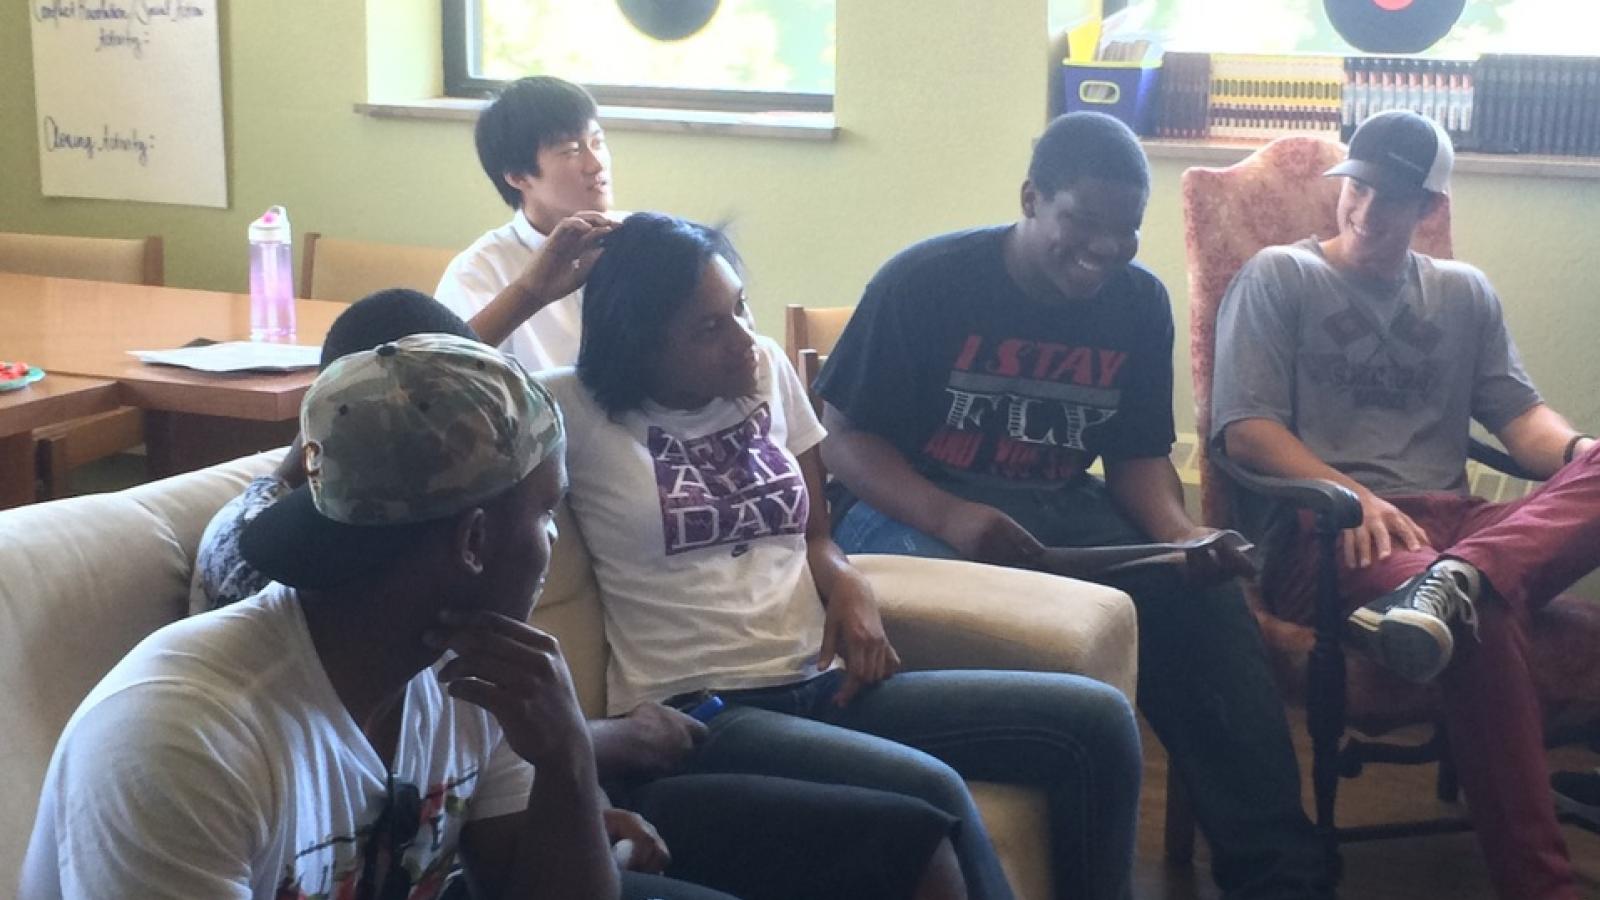 Students relax and chat at Freedom School